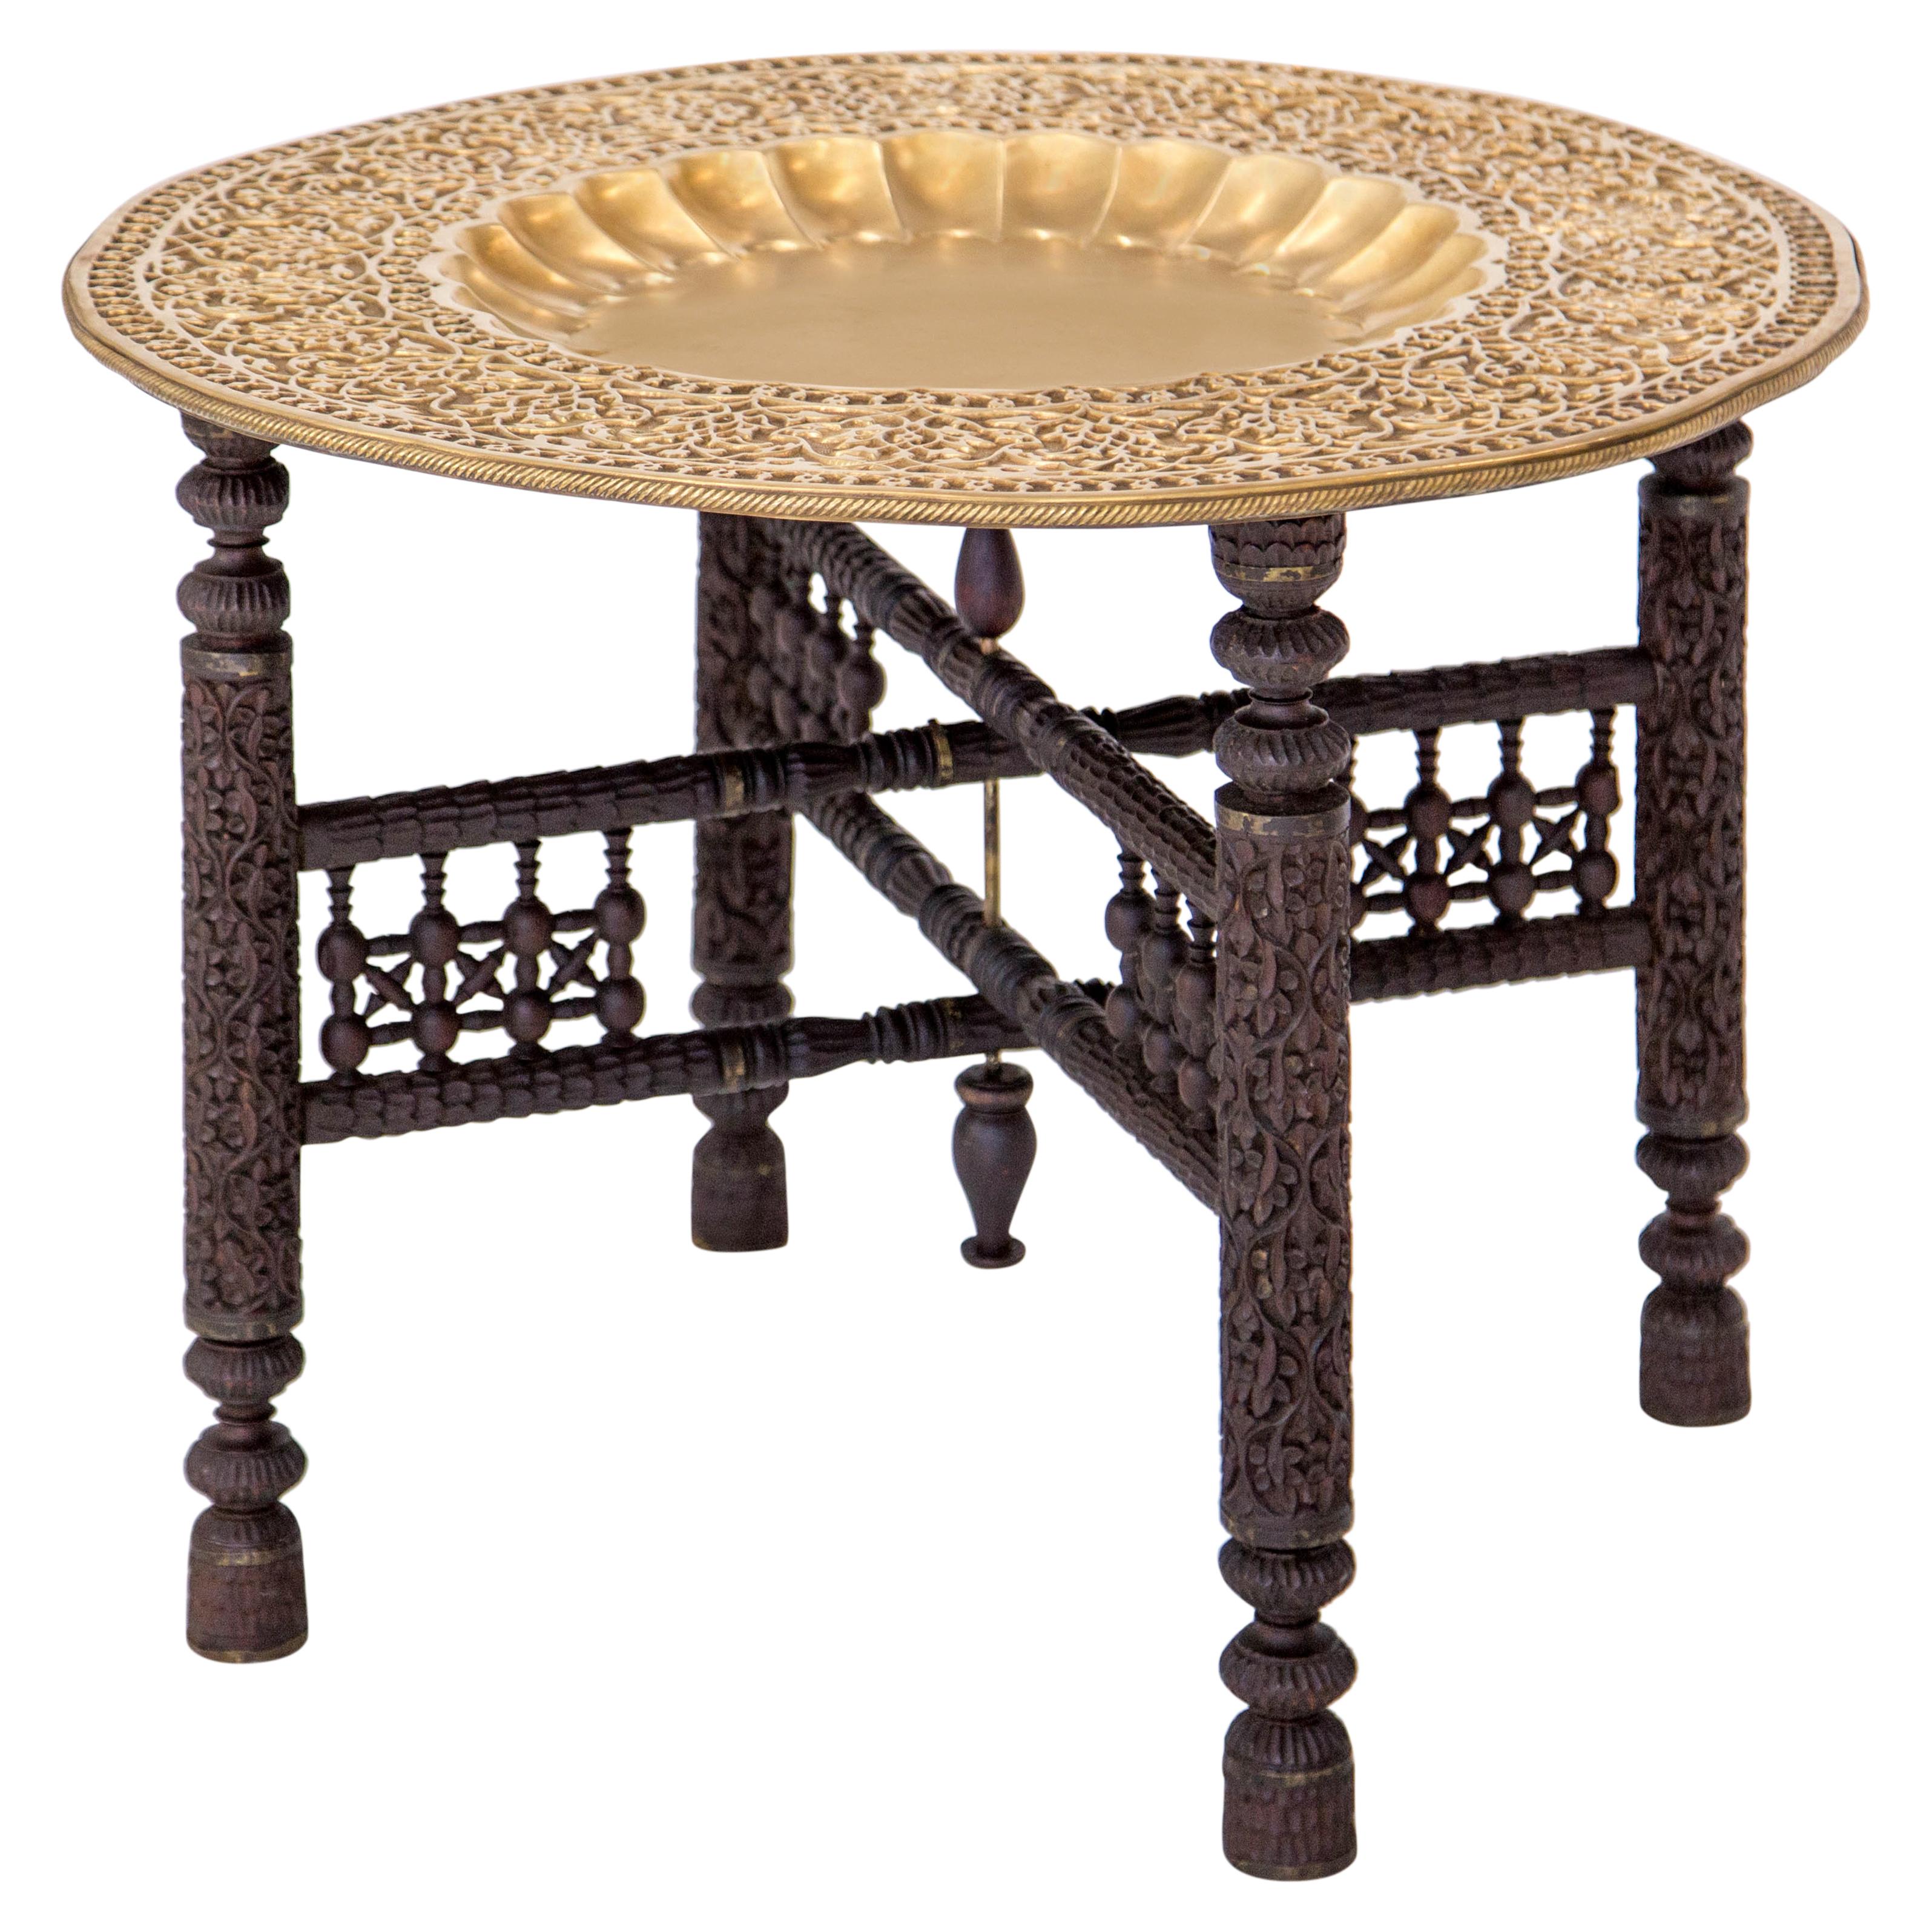 Early 20th century solid brass tray coffee on a folding carved wood stand. The tray has a smooth dished center with scalloped sides surrounded by an wide ornate stamped rim in a geometric foliate pattern inside a subtle pie crust edge. The tray